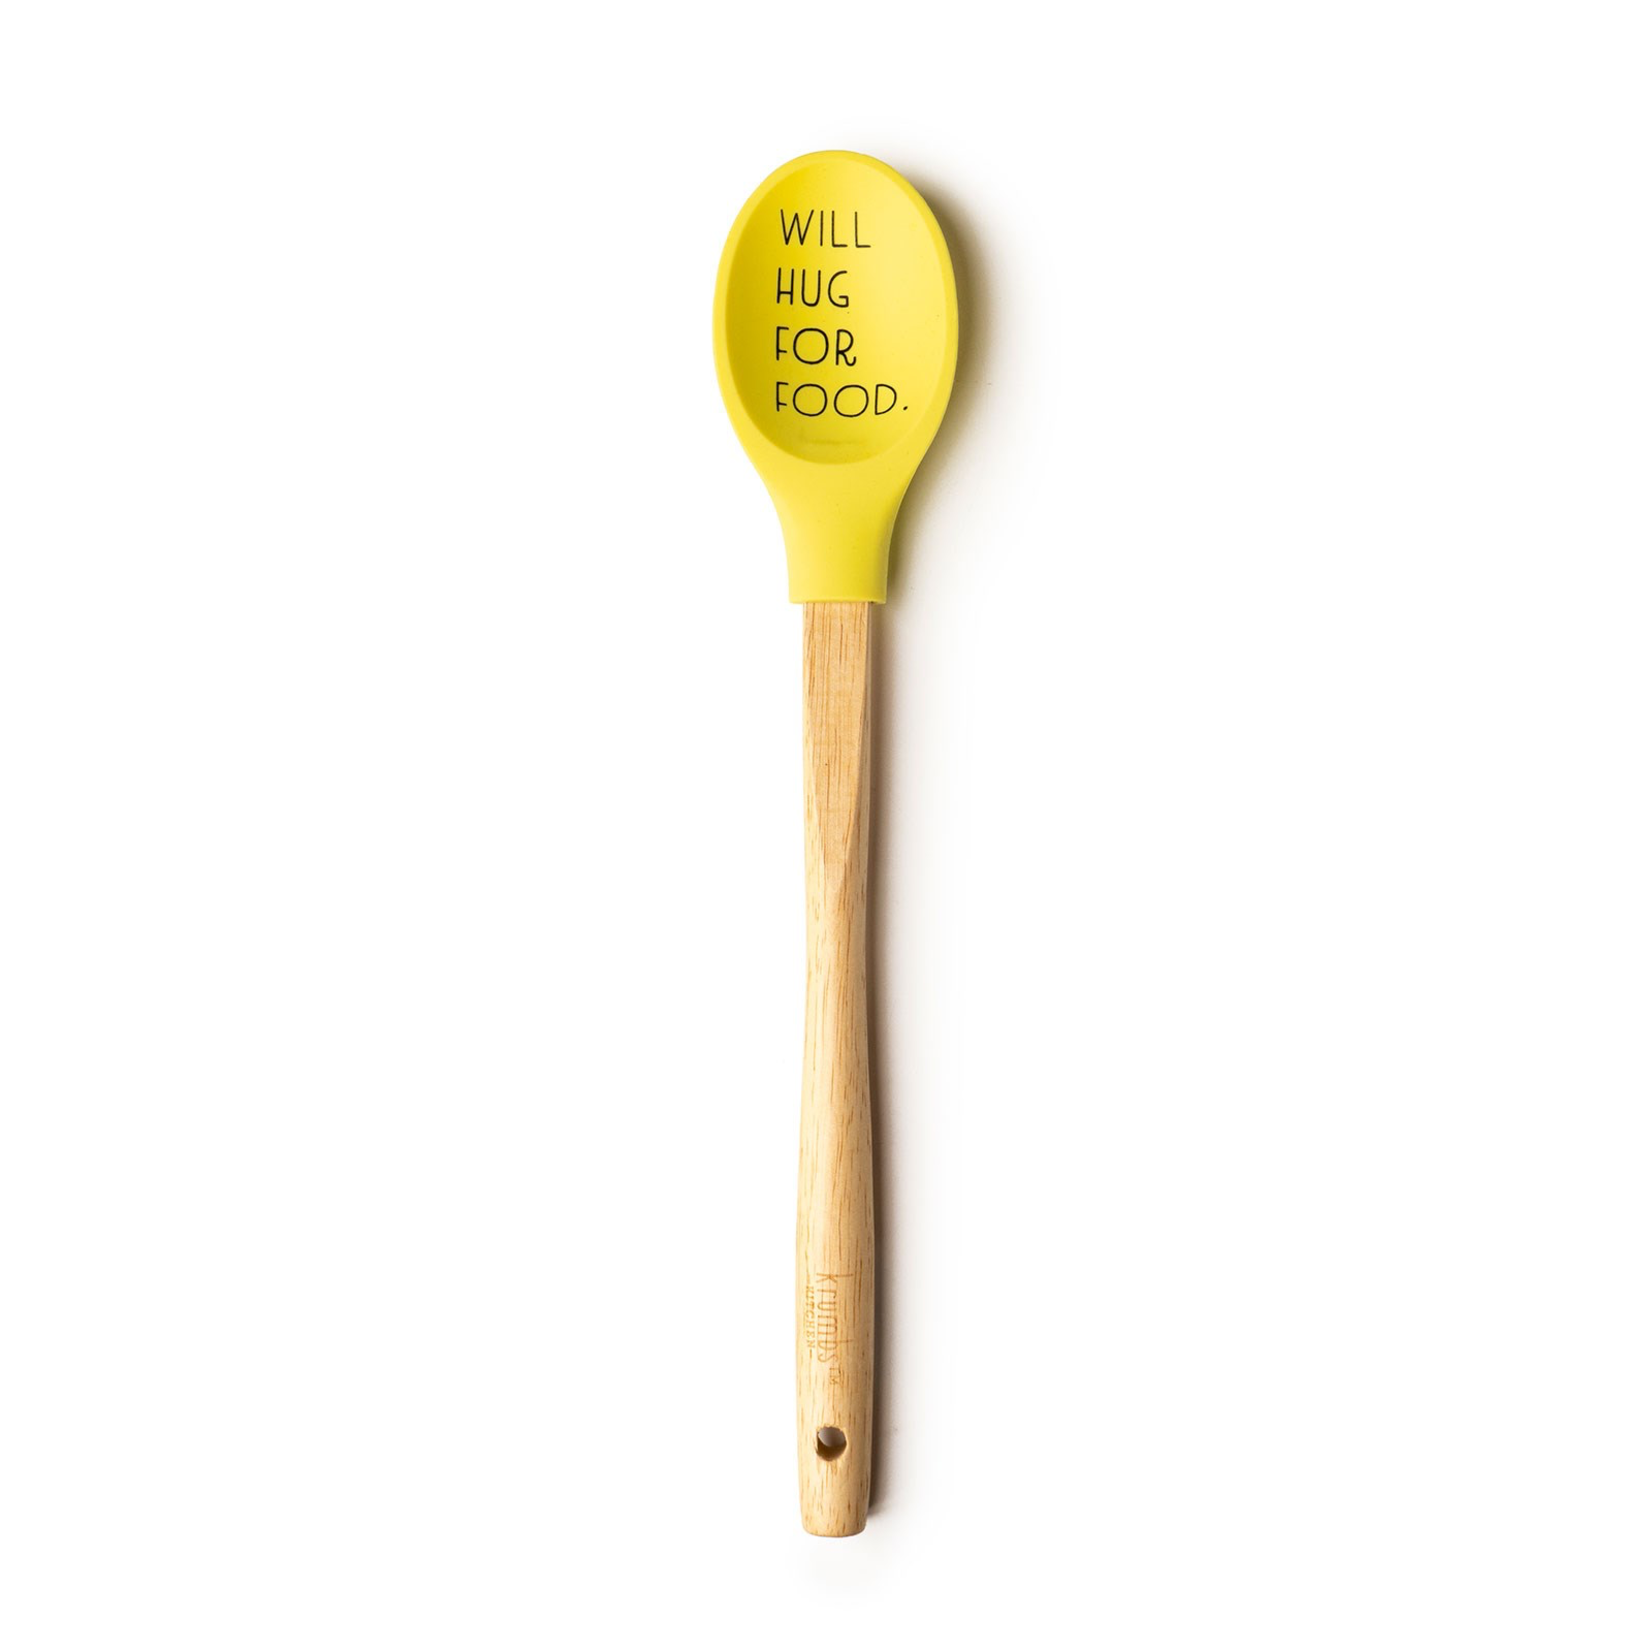 Krumbs Kitchen Yellow Silicone Spoon Will Hug for Food